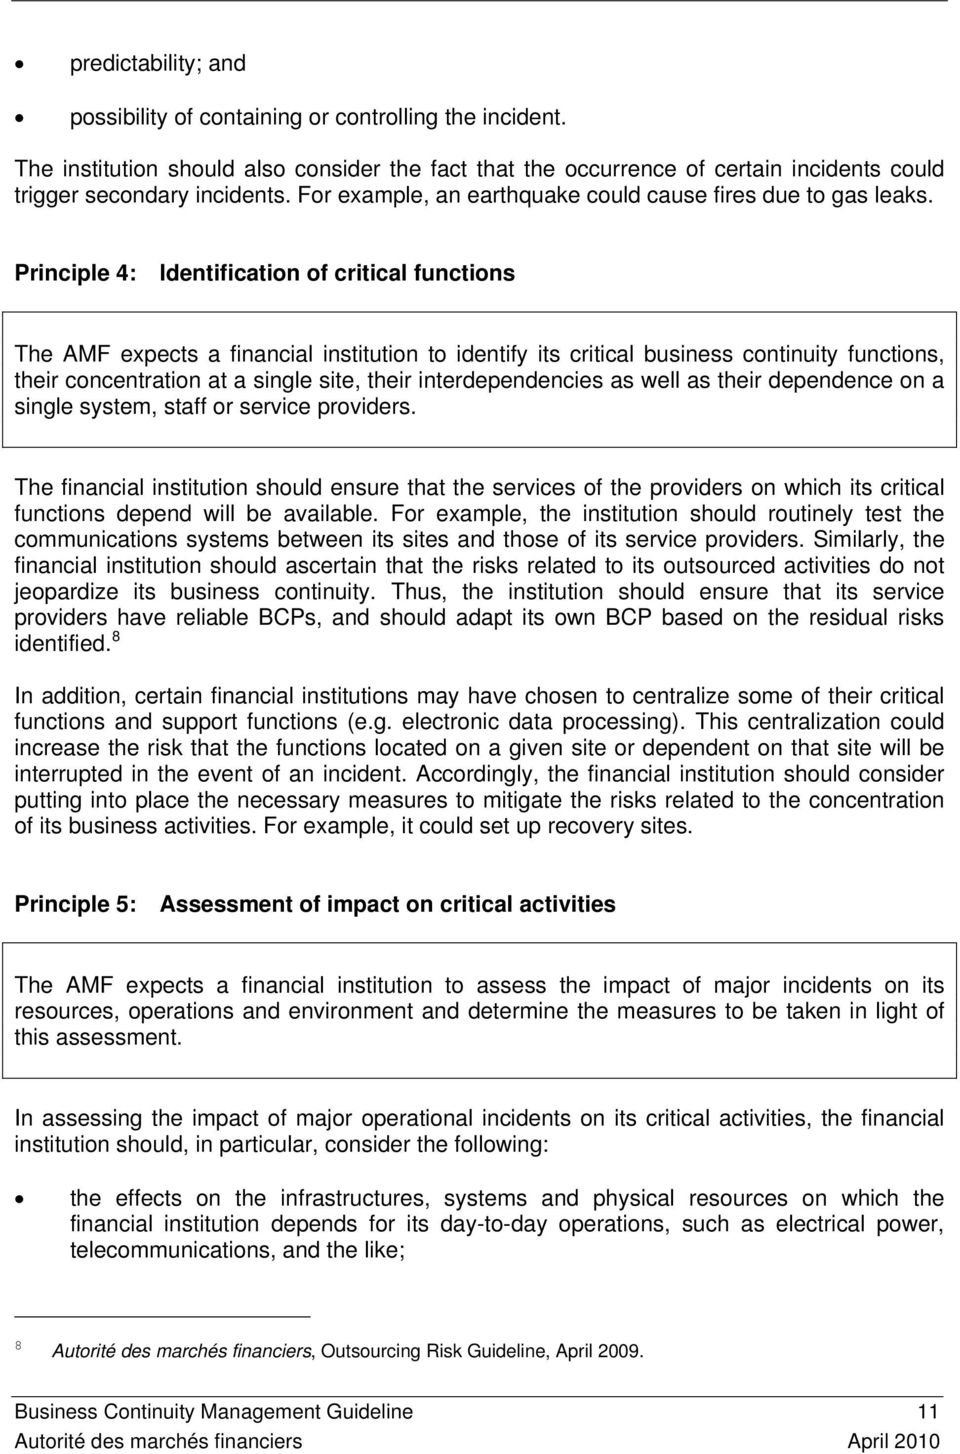 Principle 4: Identification of critical functions The AMF expects a financial institution to identify its critical business continuity functions, their concentration at a single site, their